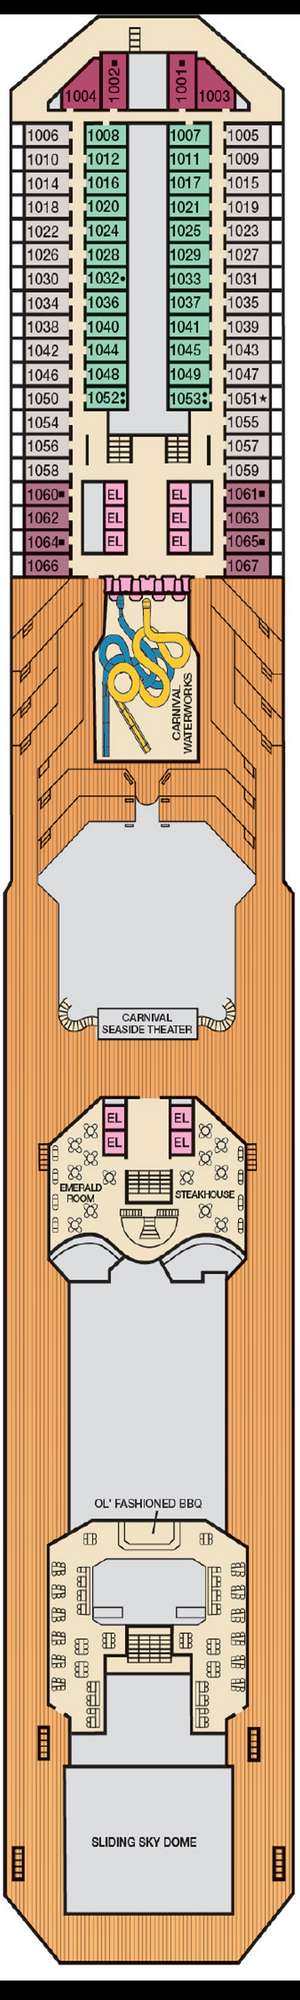 Deck plan for Carnival Glory